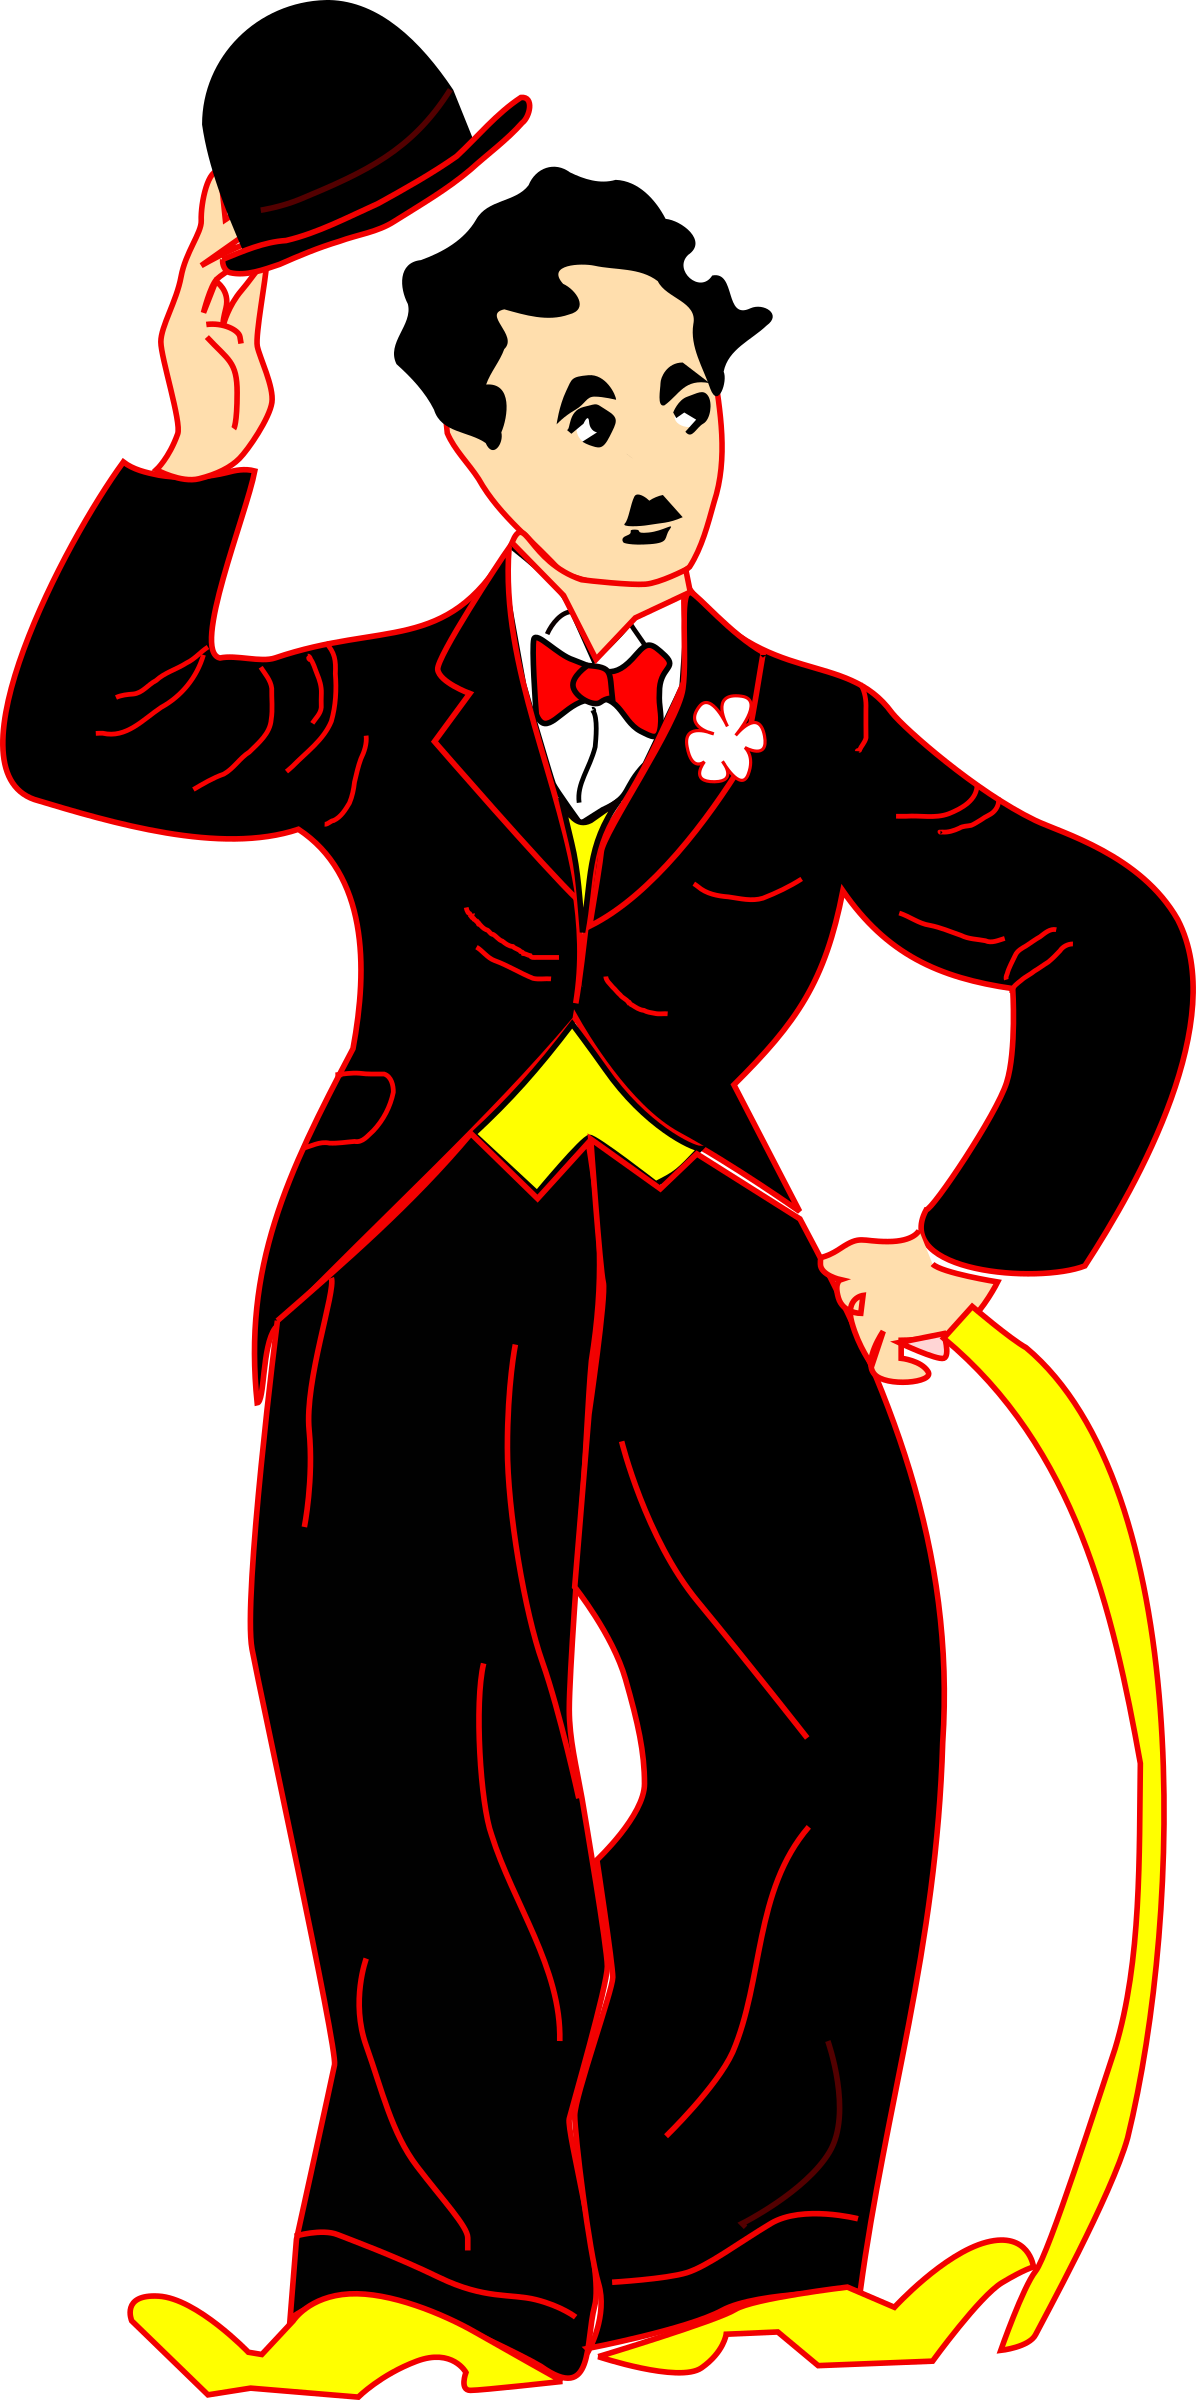 A Cartoon Of A Man In A Suit